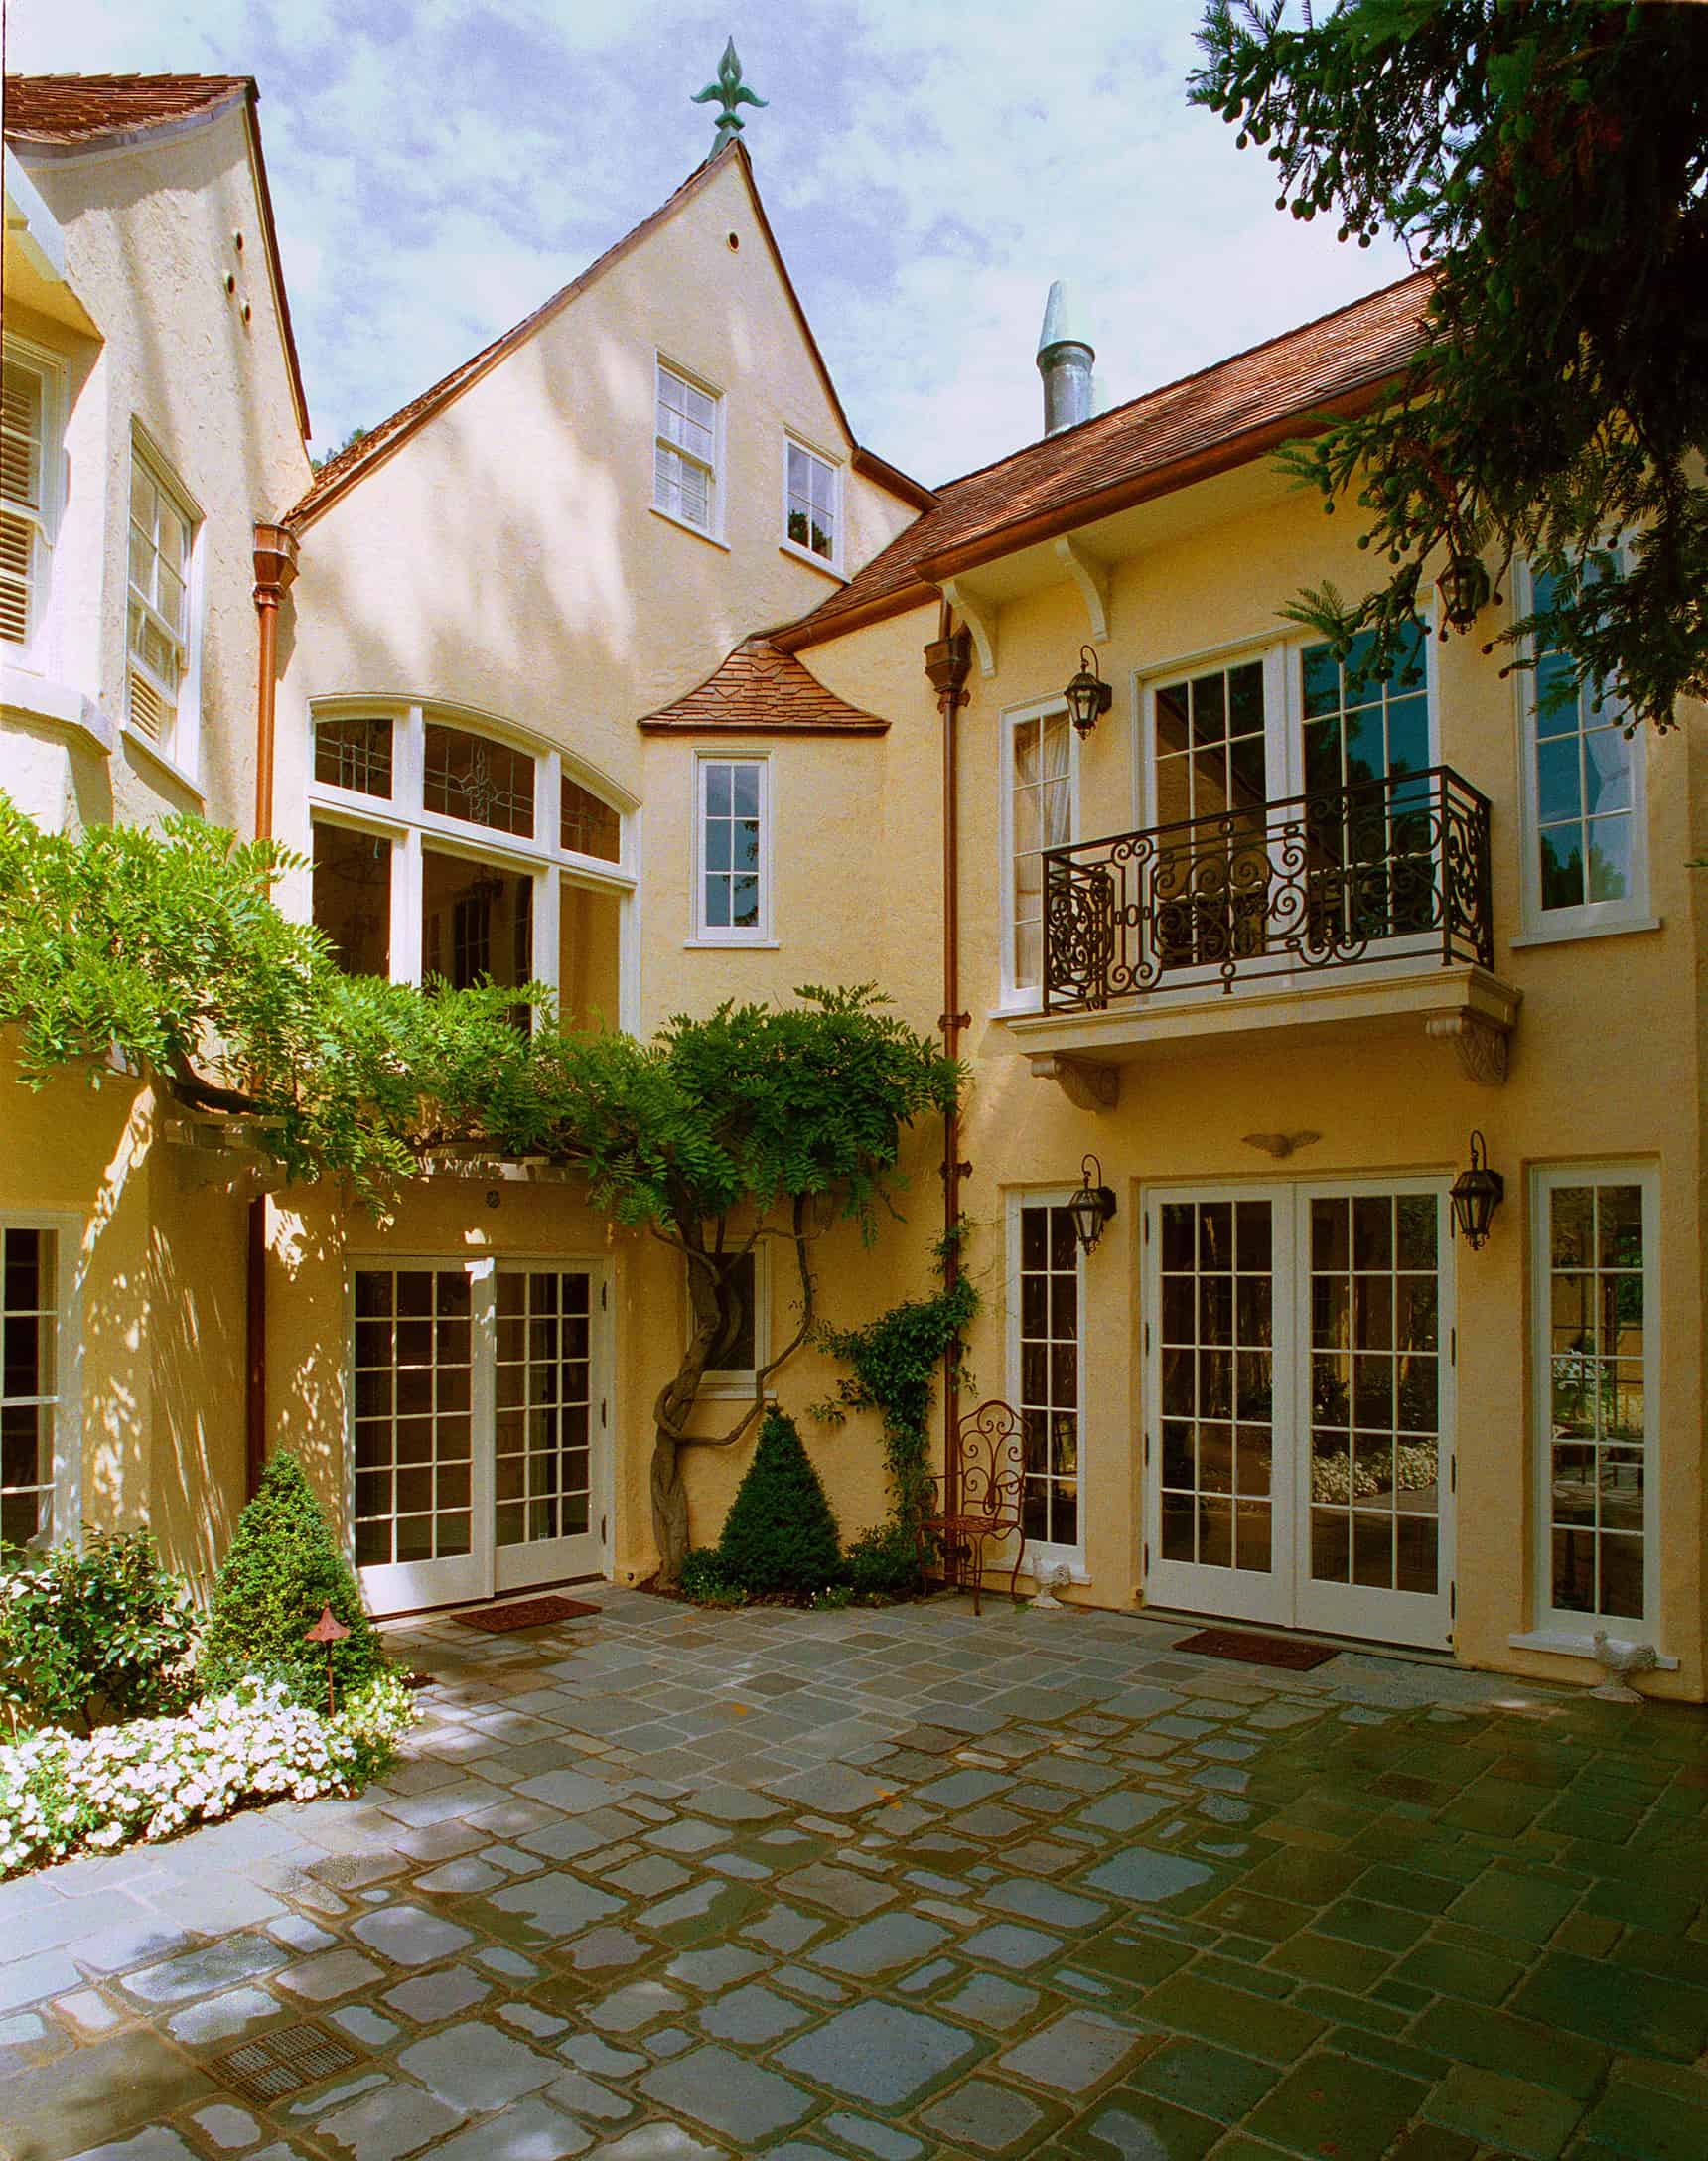 Exterior view of historic home with cobblestone entryway.